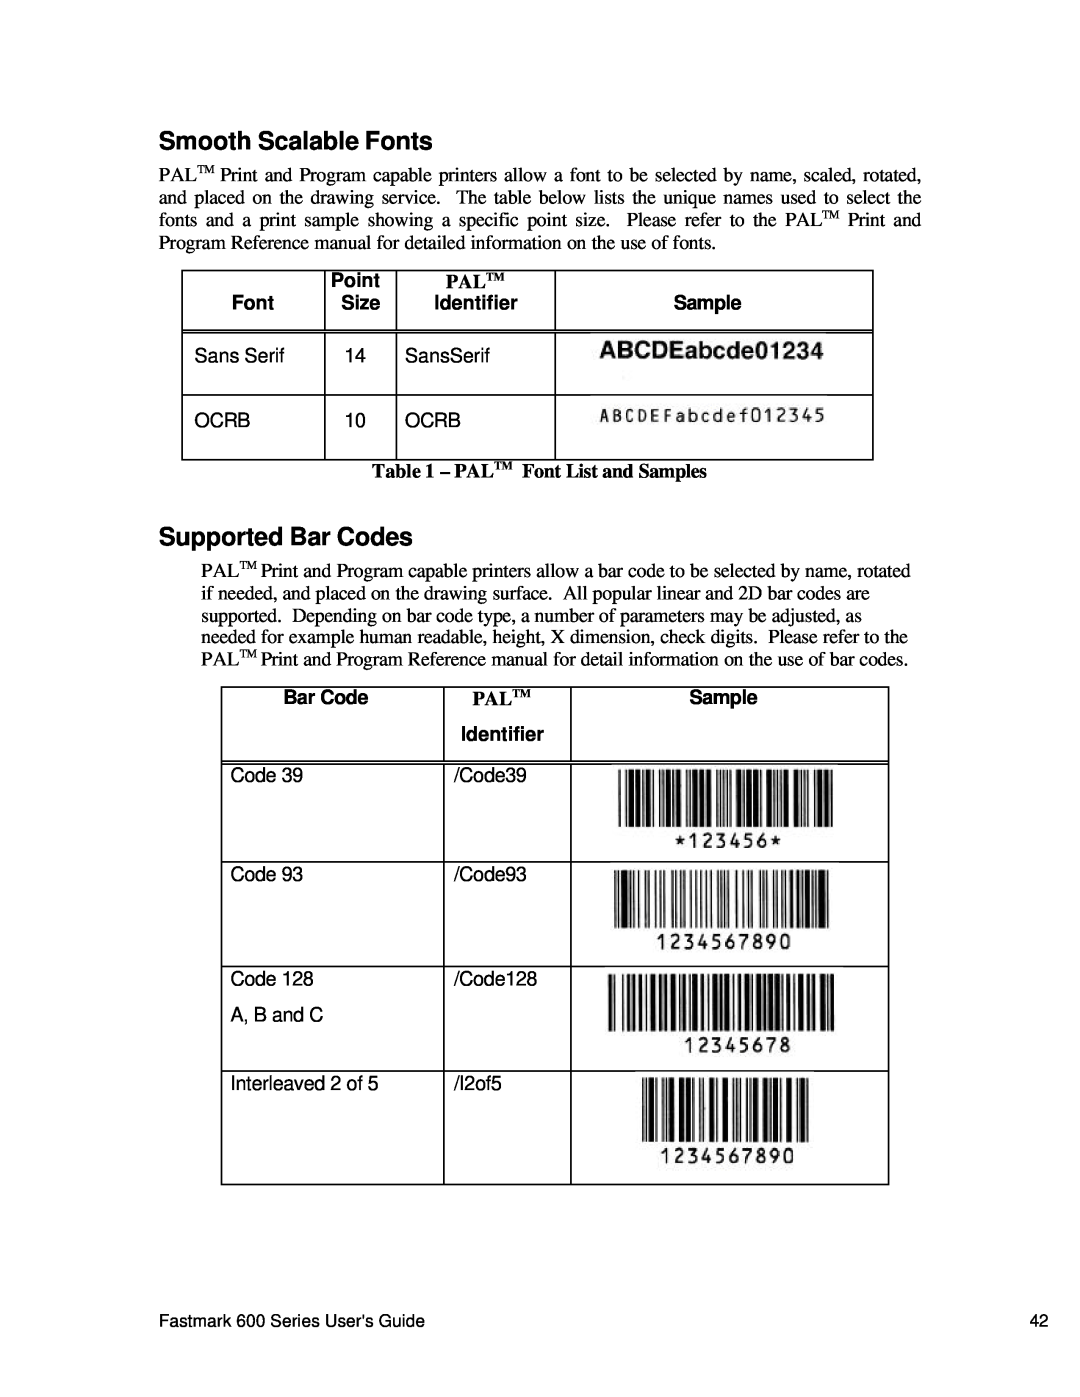 AMT Datasouth 600 manual Smooth Scalable Fonts, Supported Bar Codes, Point, Pal Tm, Size, PAL TM Font List and Samples 